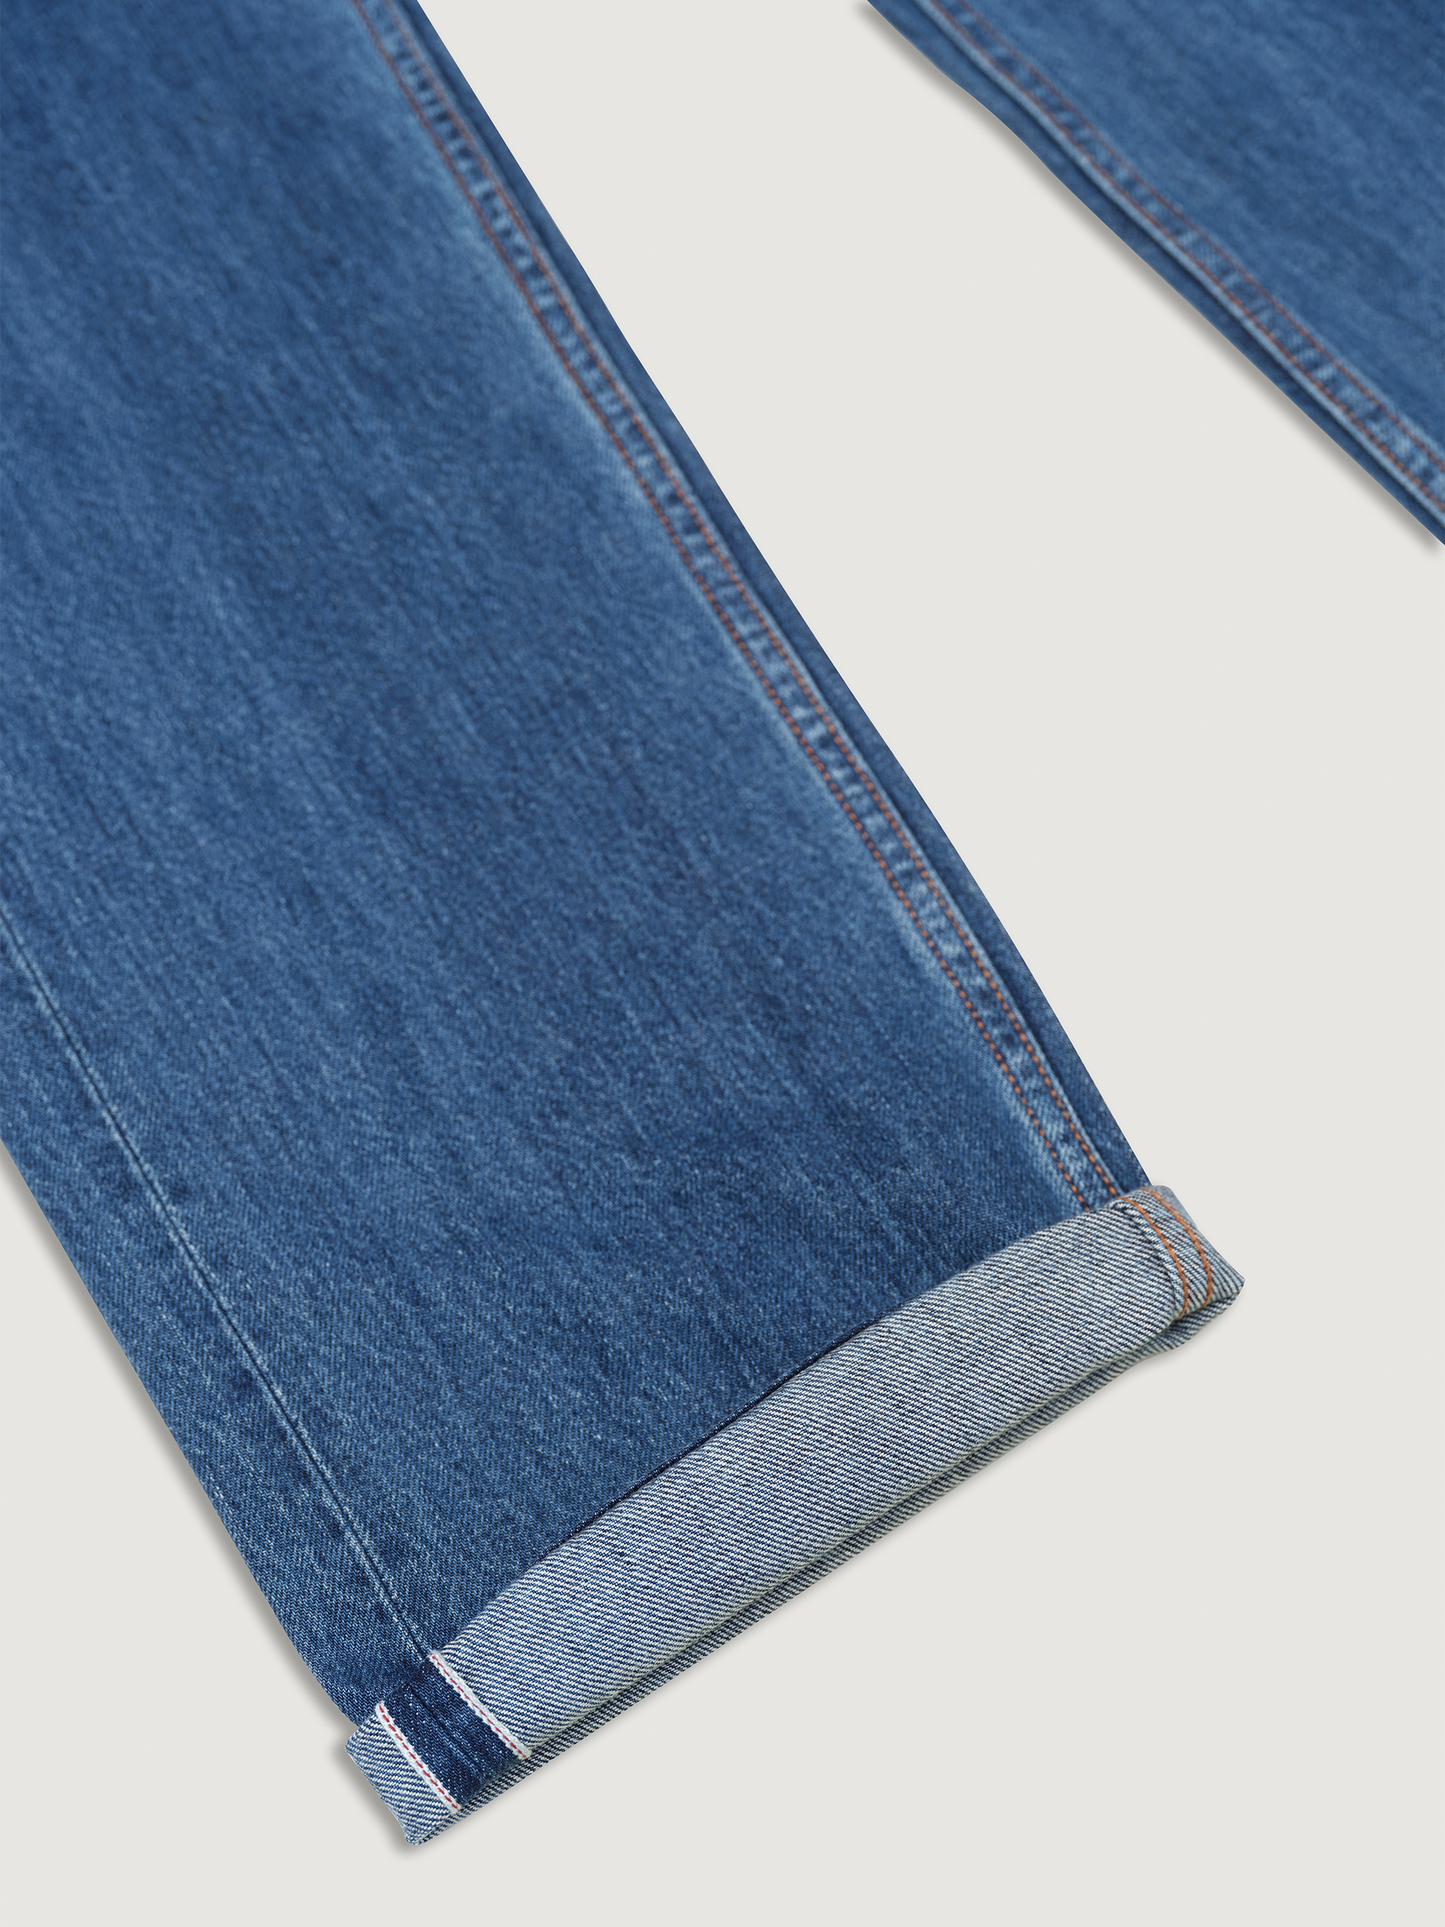 Mid Wash Classic Five Pocket Jeans